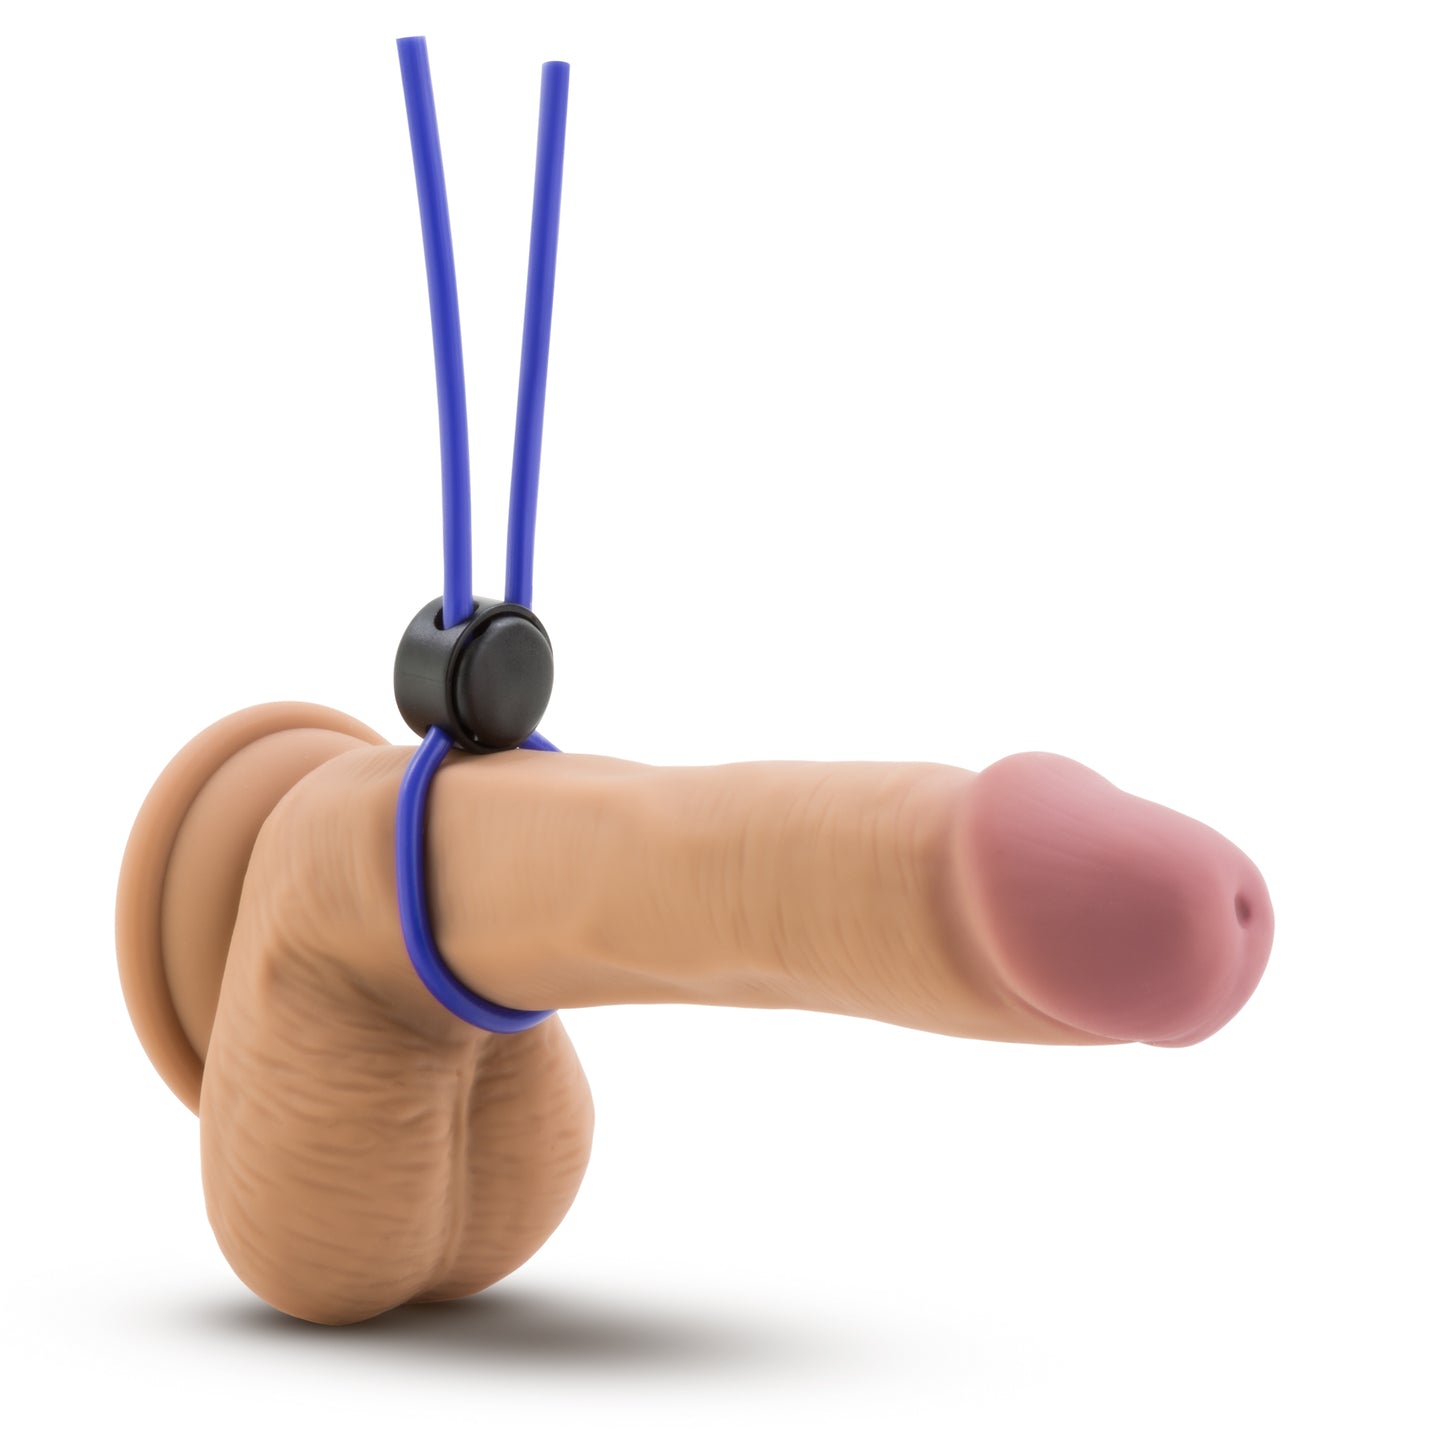 Stay Hard - Silicone Loop Cock Ring - Blue